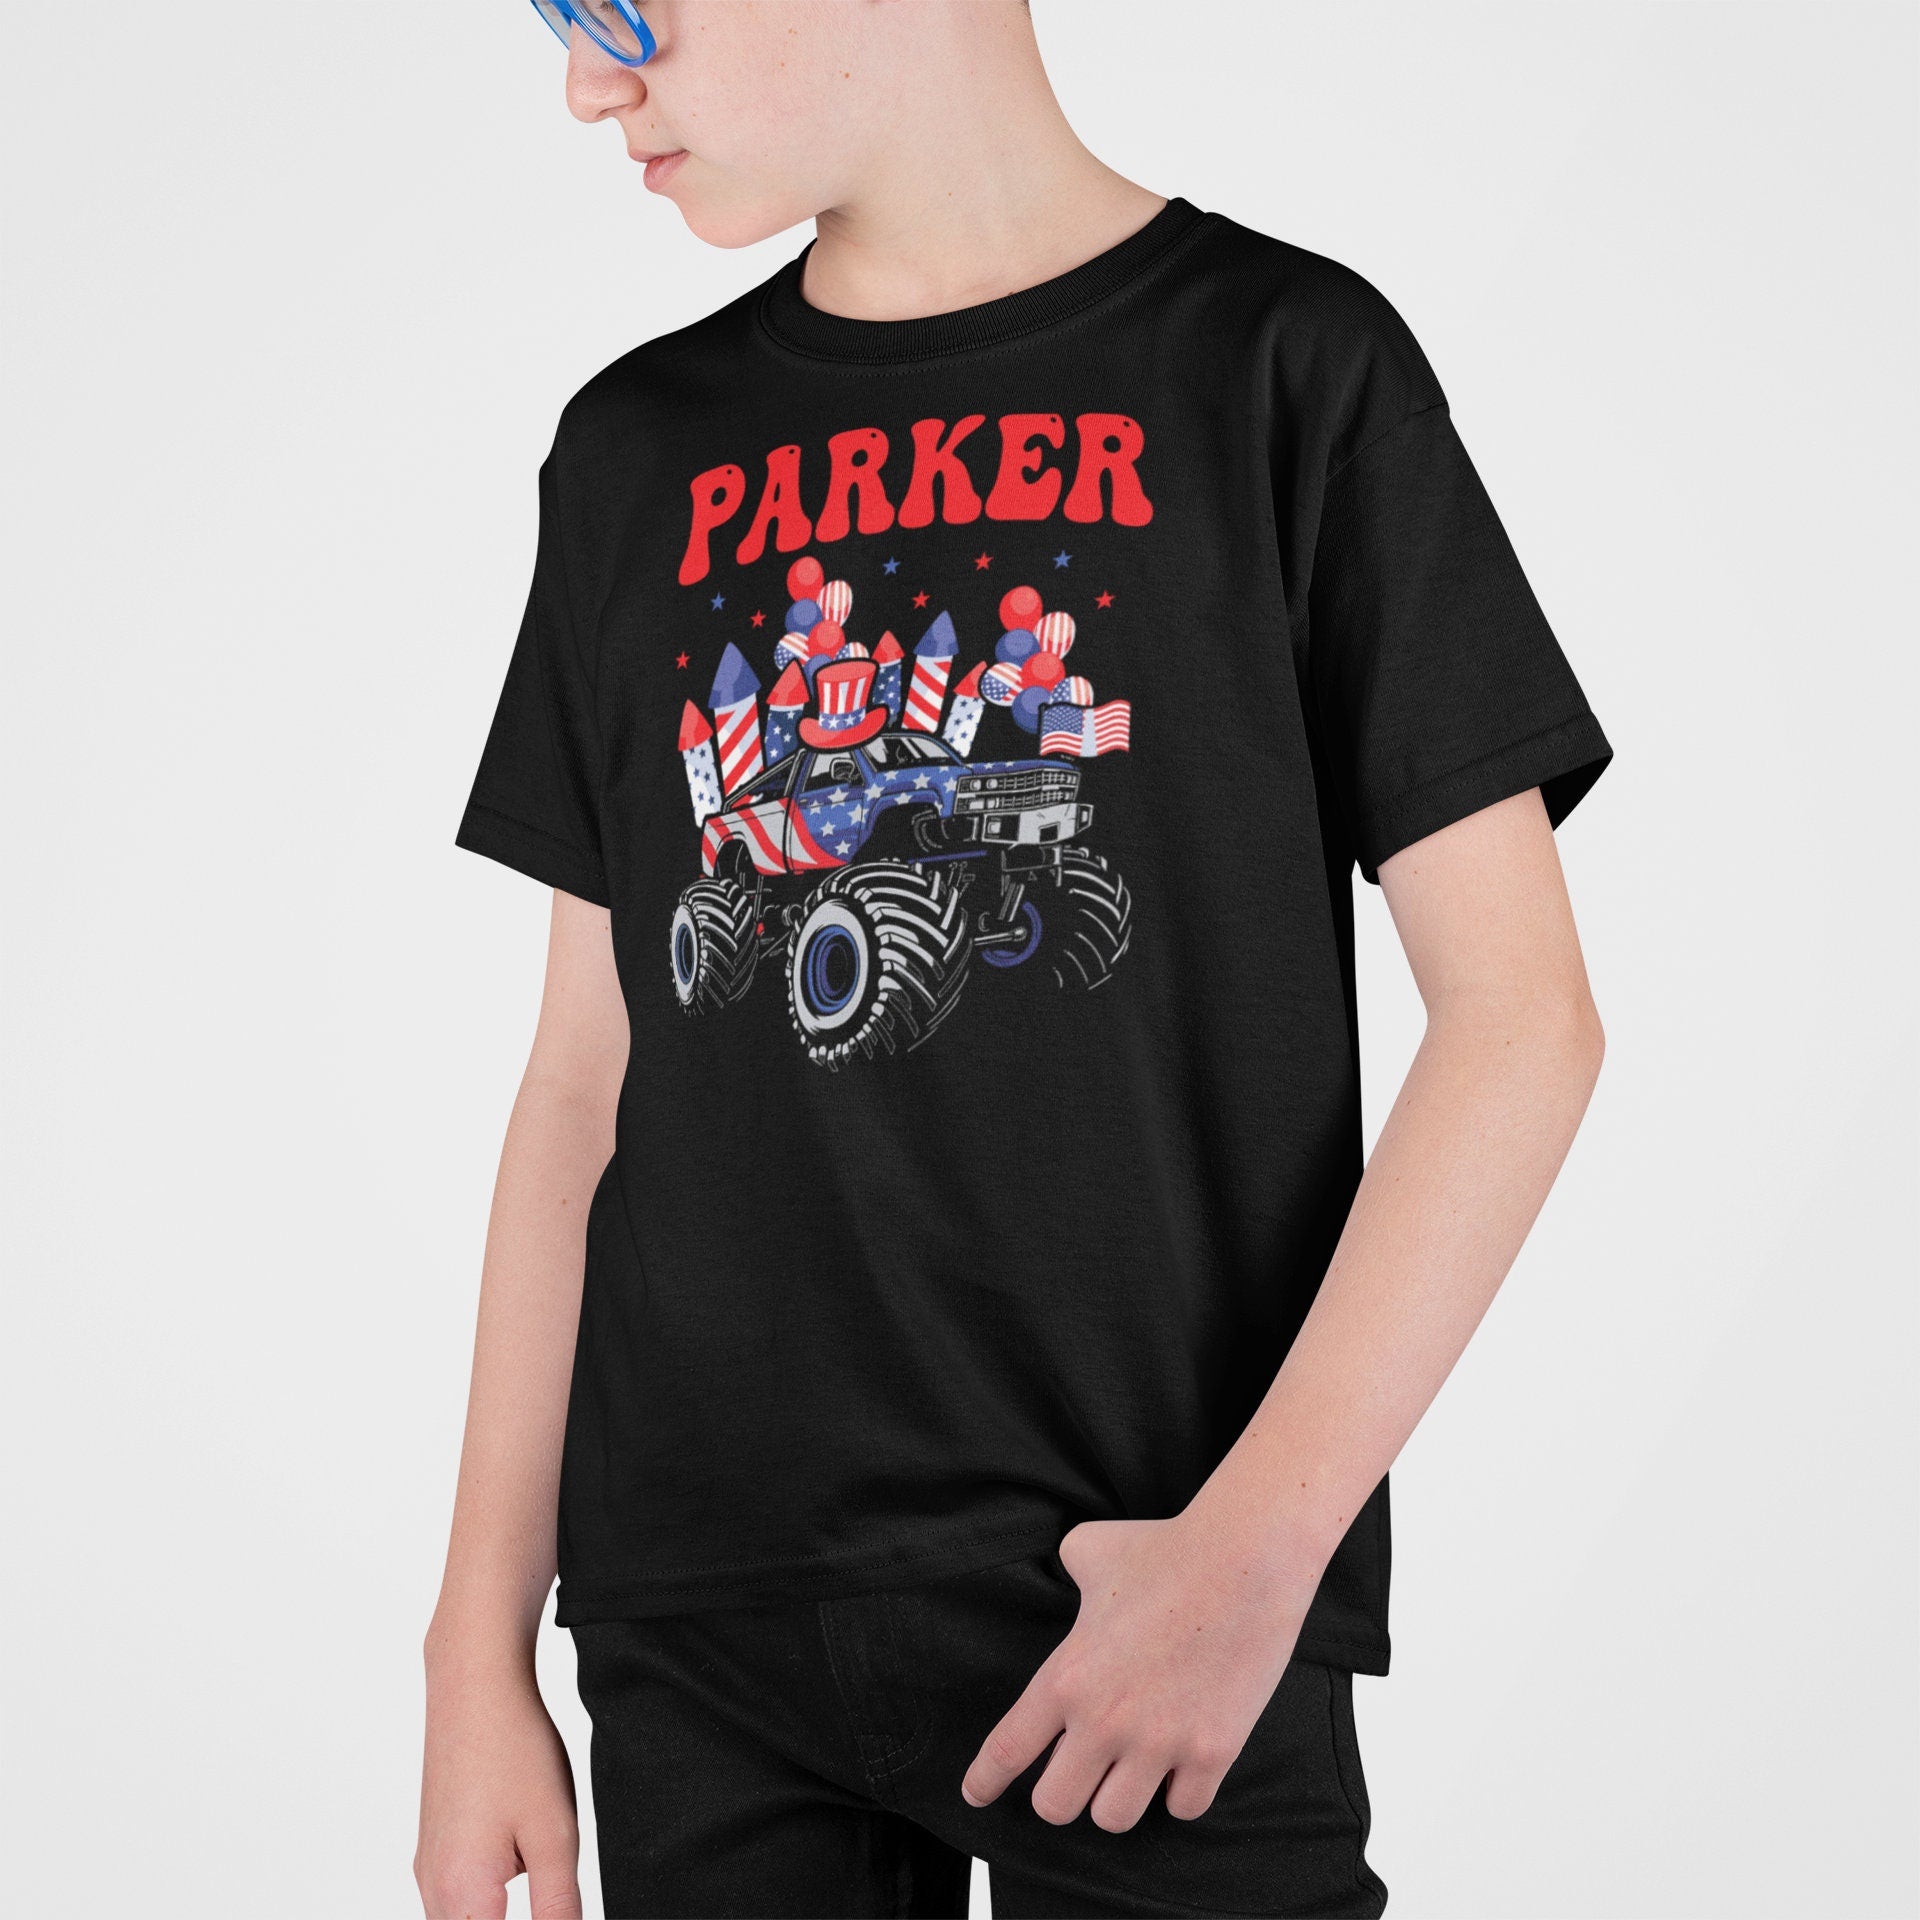 USA Parker Kids Toddlers Shirt, 4th Of July Shirt For Kids